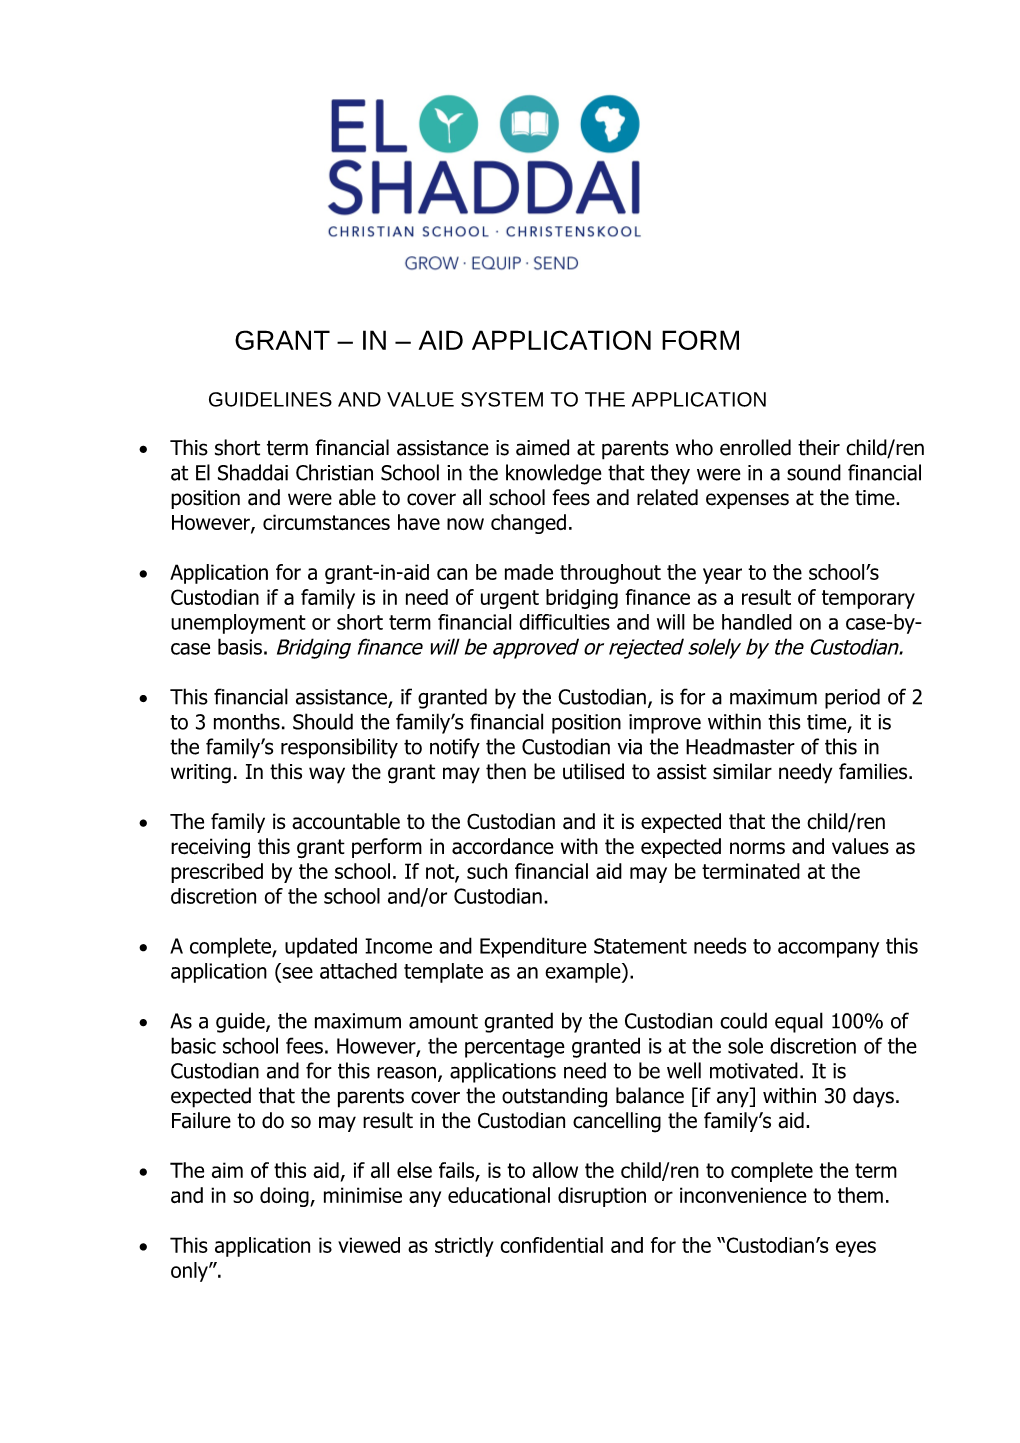 Grant in Aid Application Form